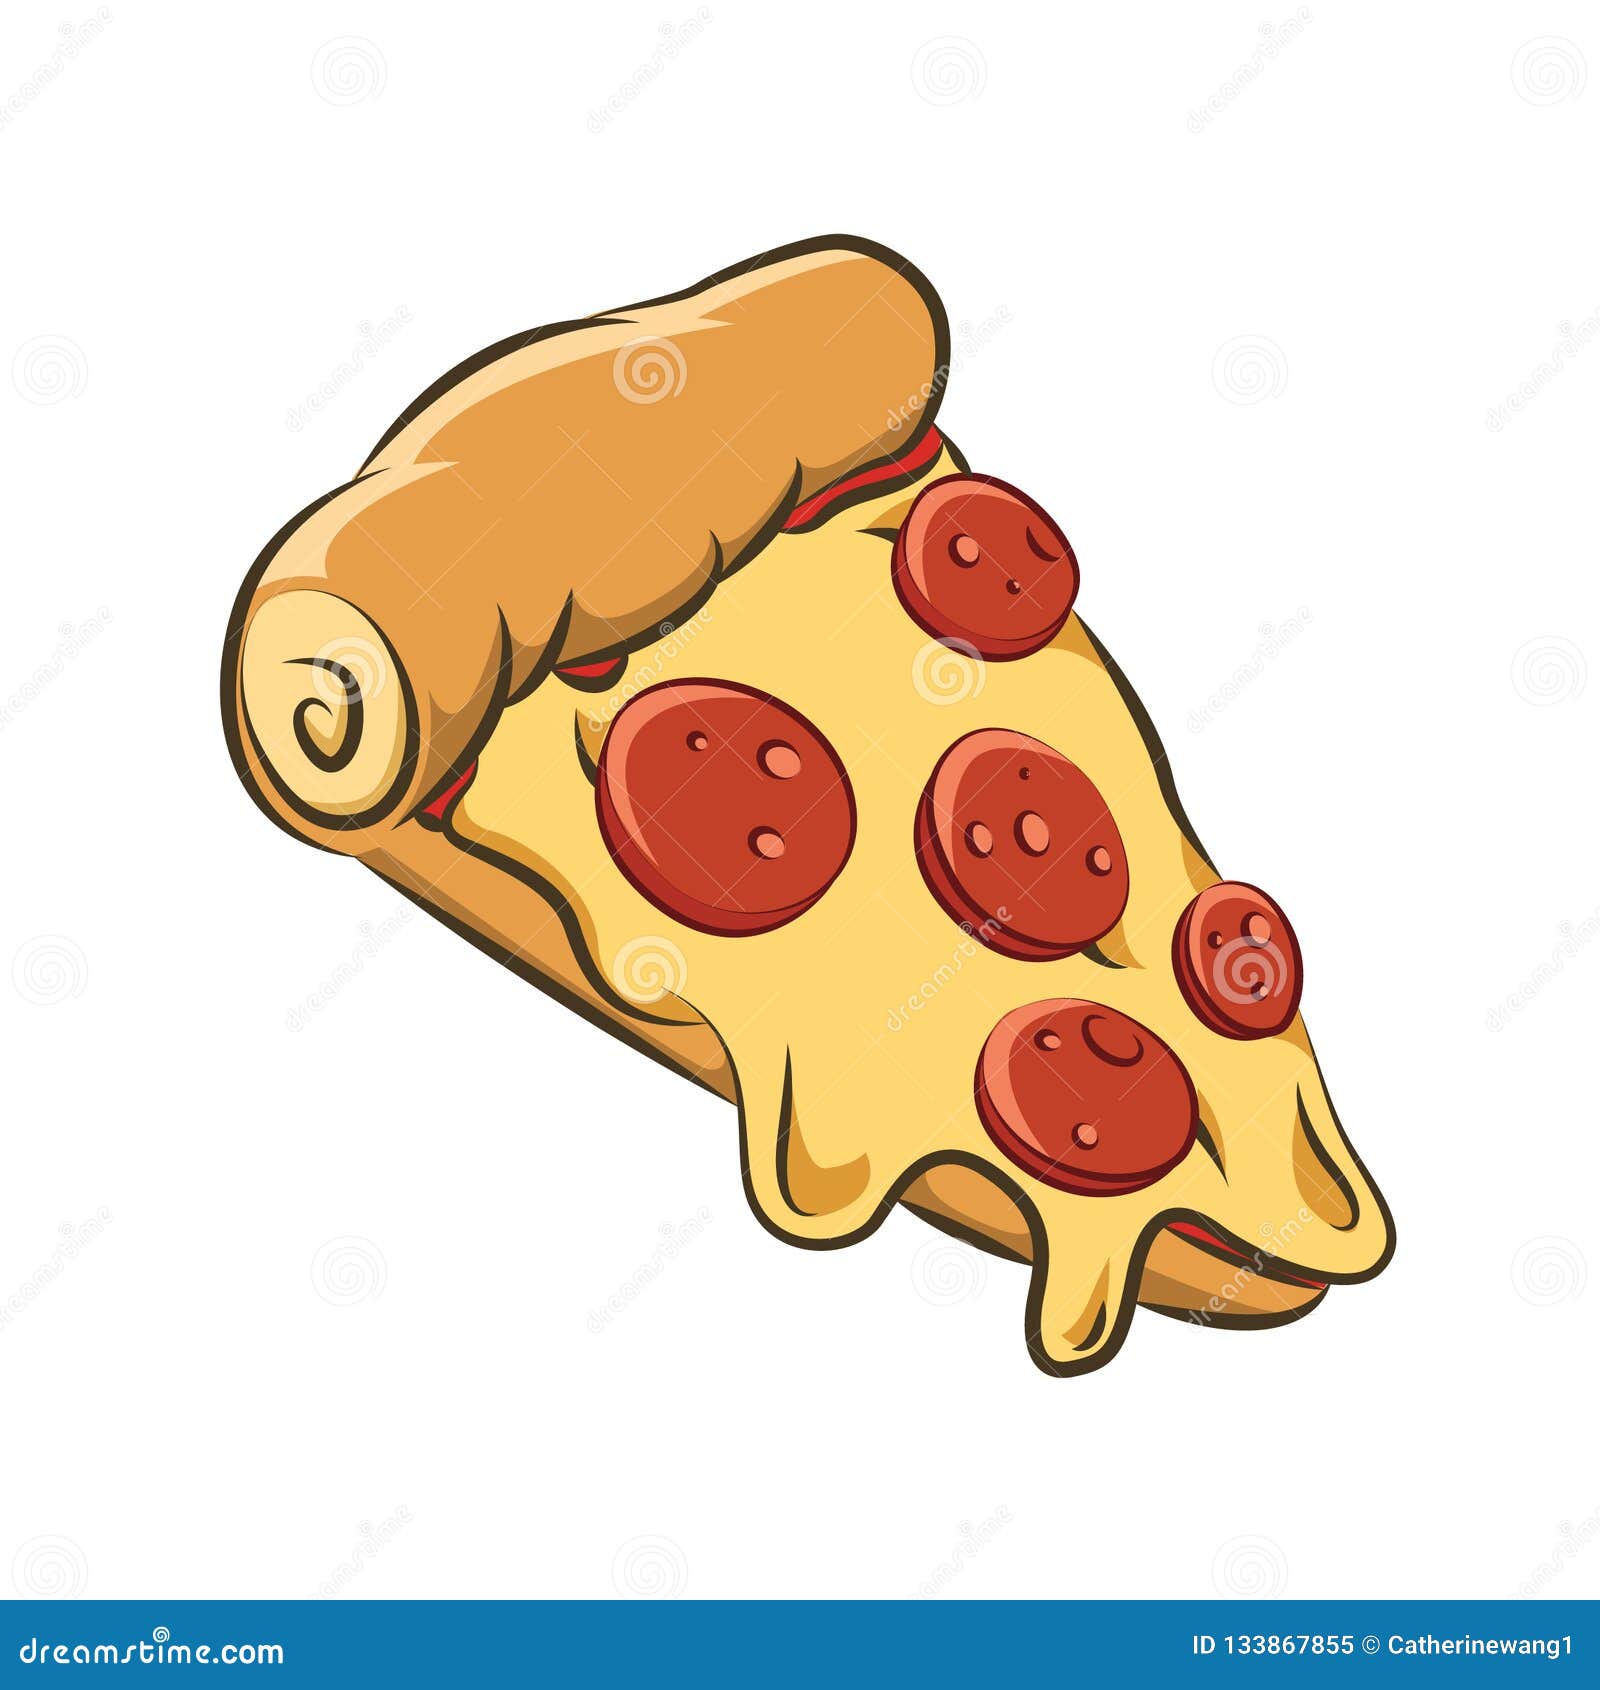 Premium Vector  Pizza with slice cut out vector doodle outline